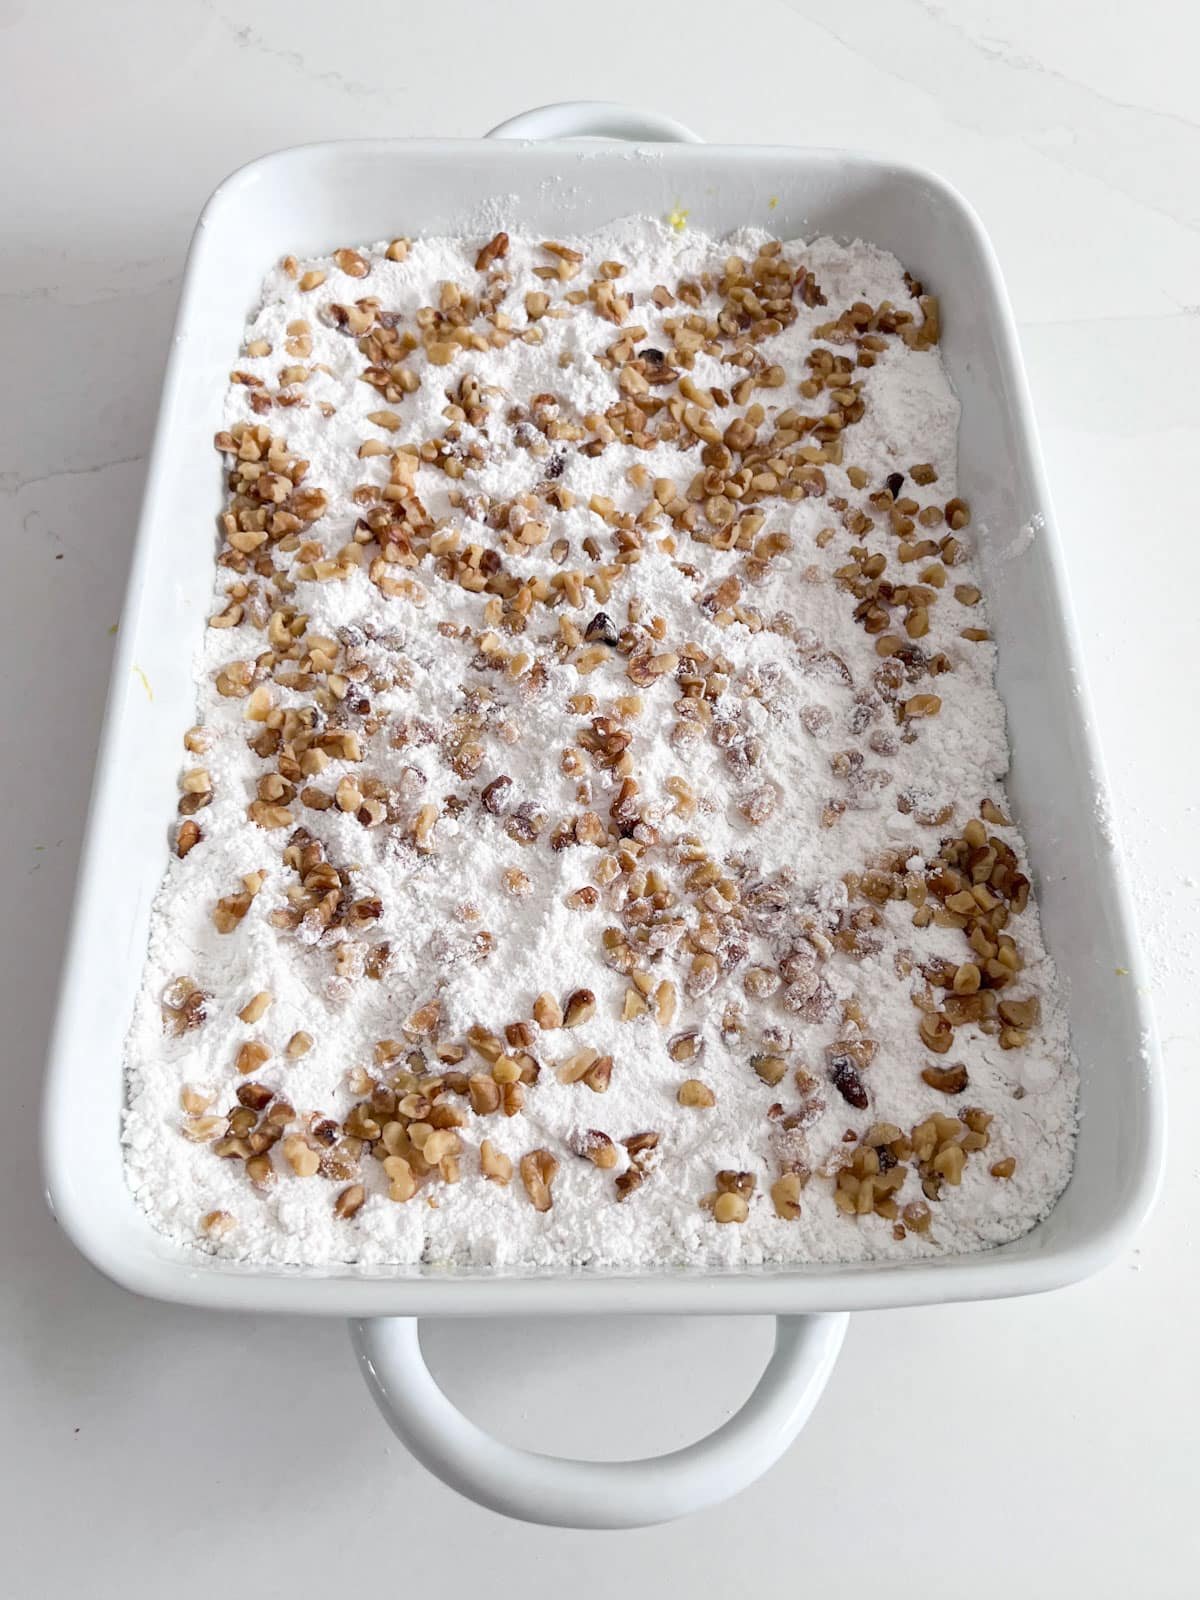 The cake pan with the even layer of cake mix on top and chopped walnuts sprinkled on that.